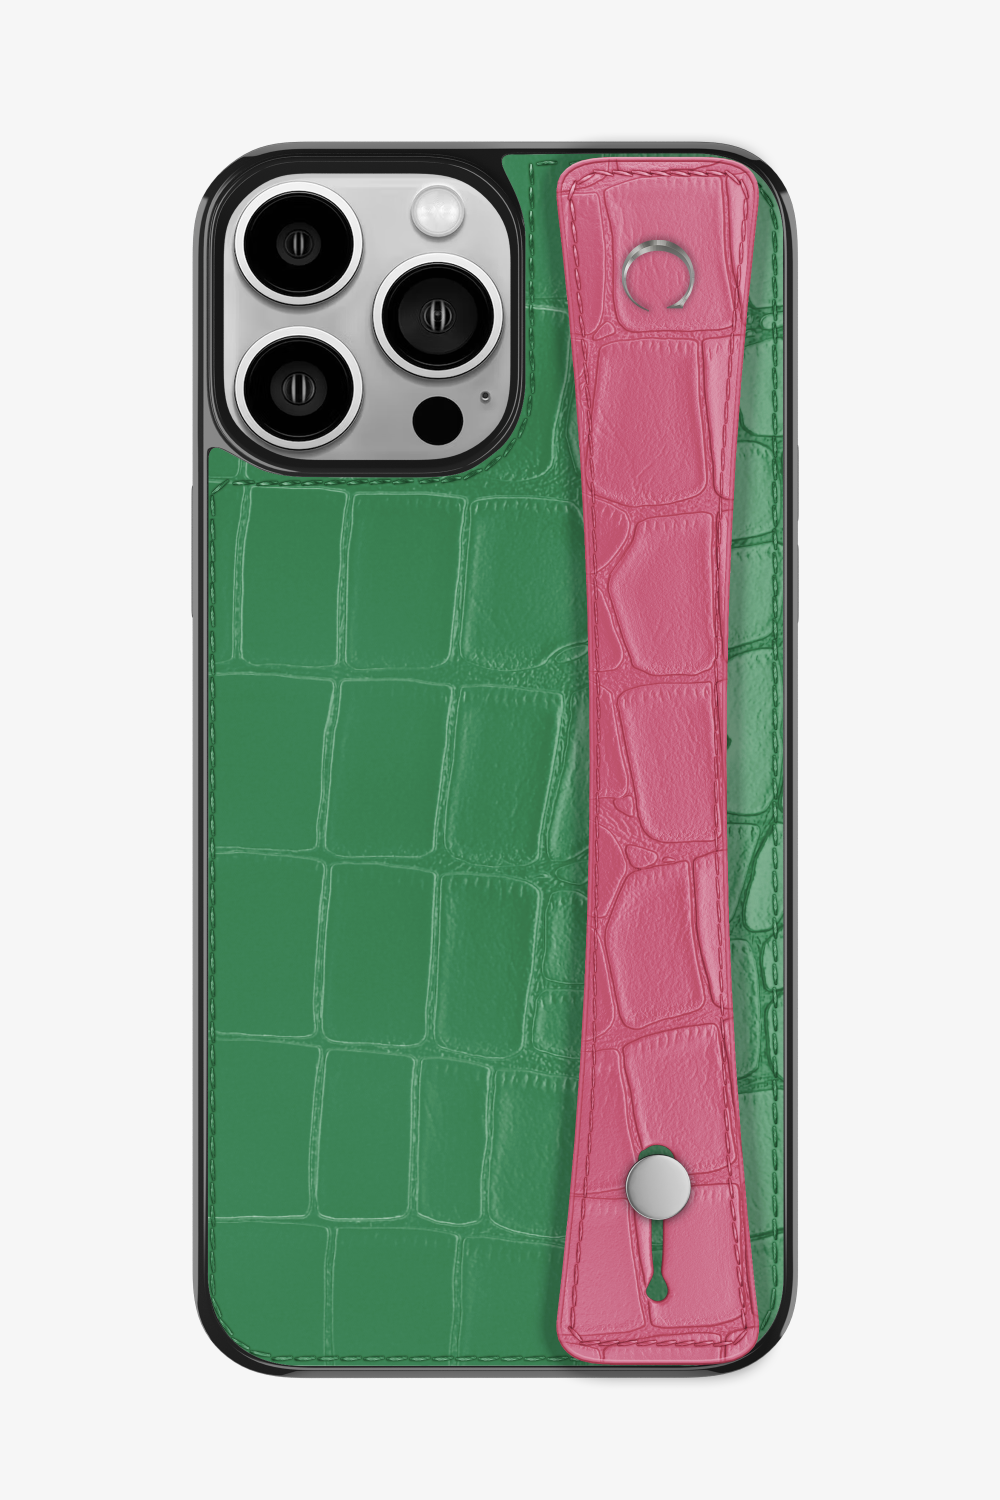 Alligator Sports Strap Case for iPhone 14 Pro Max - Green Emerald / Pink - zollofrance